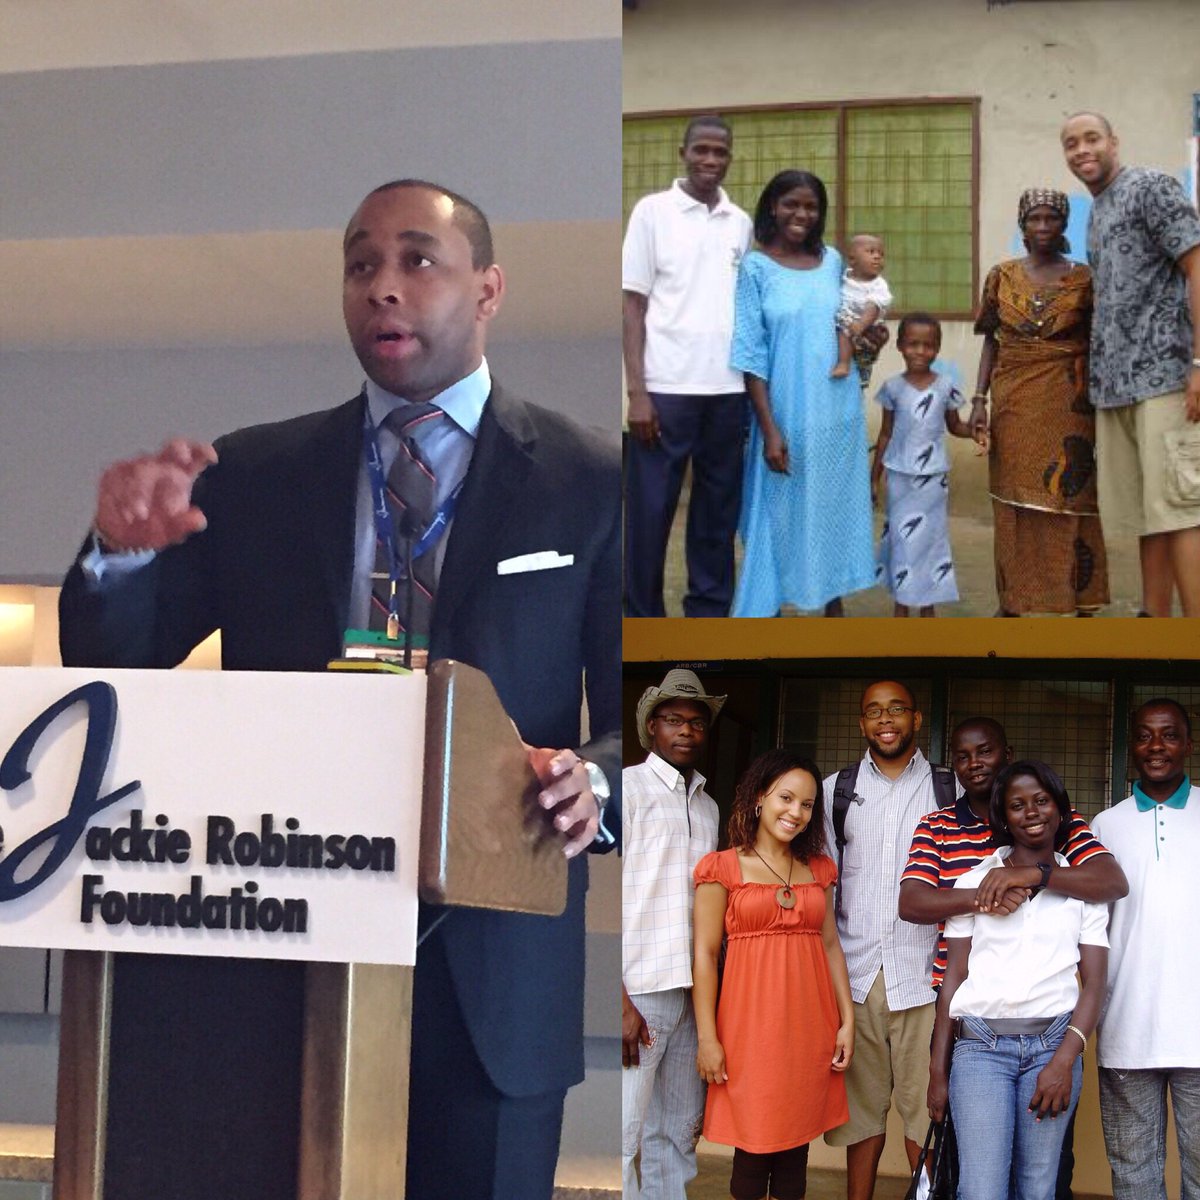 '#JRFoundation has been part of my development as a #professional & #globalcitizen...through the Rachel Robinson International Fellowship I traveled to Ghana, West Africa with @CARE.' -Mauri J. Robinson, @Morehouse '08. Share your story using #MyJRFfirst! #JRFAlumni #helpothers